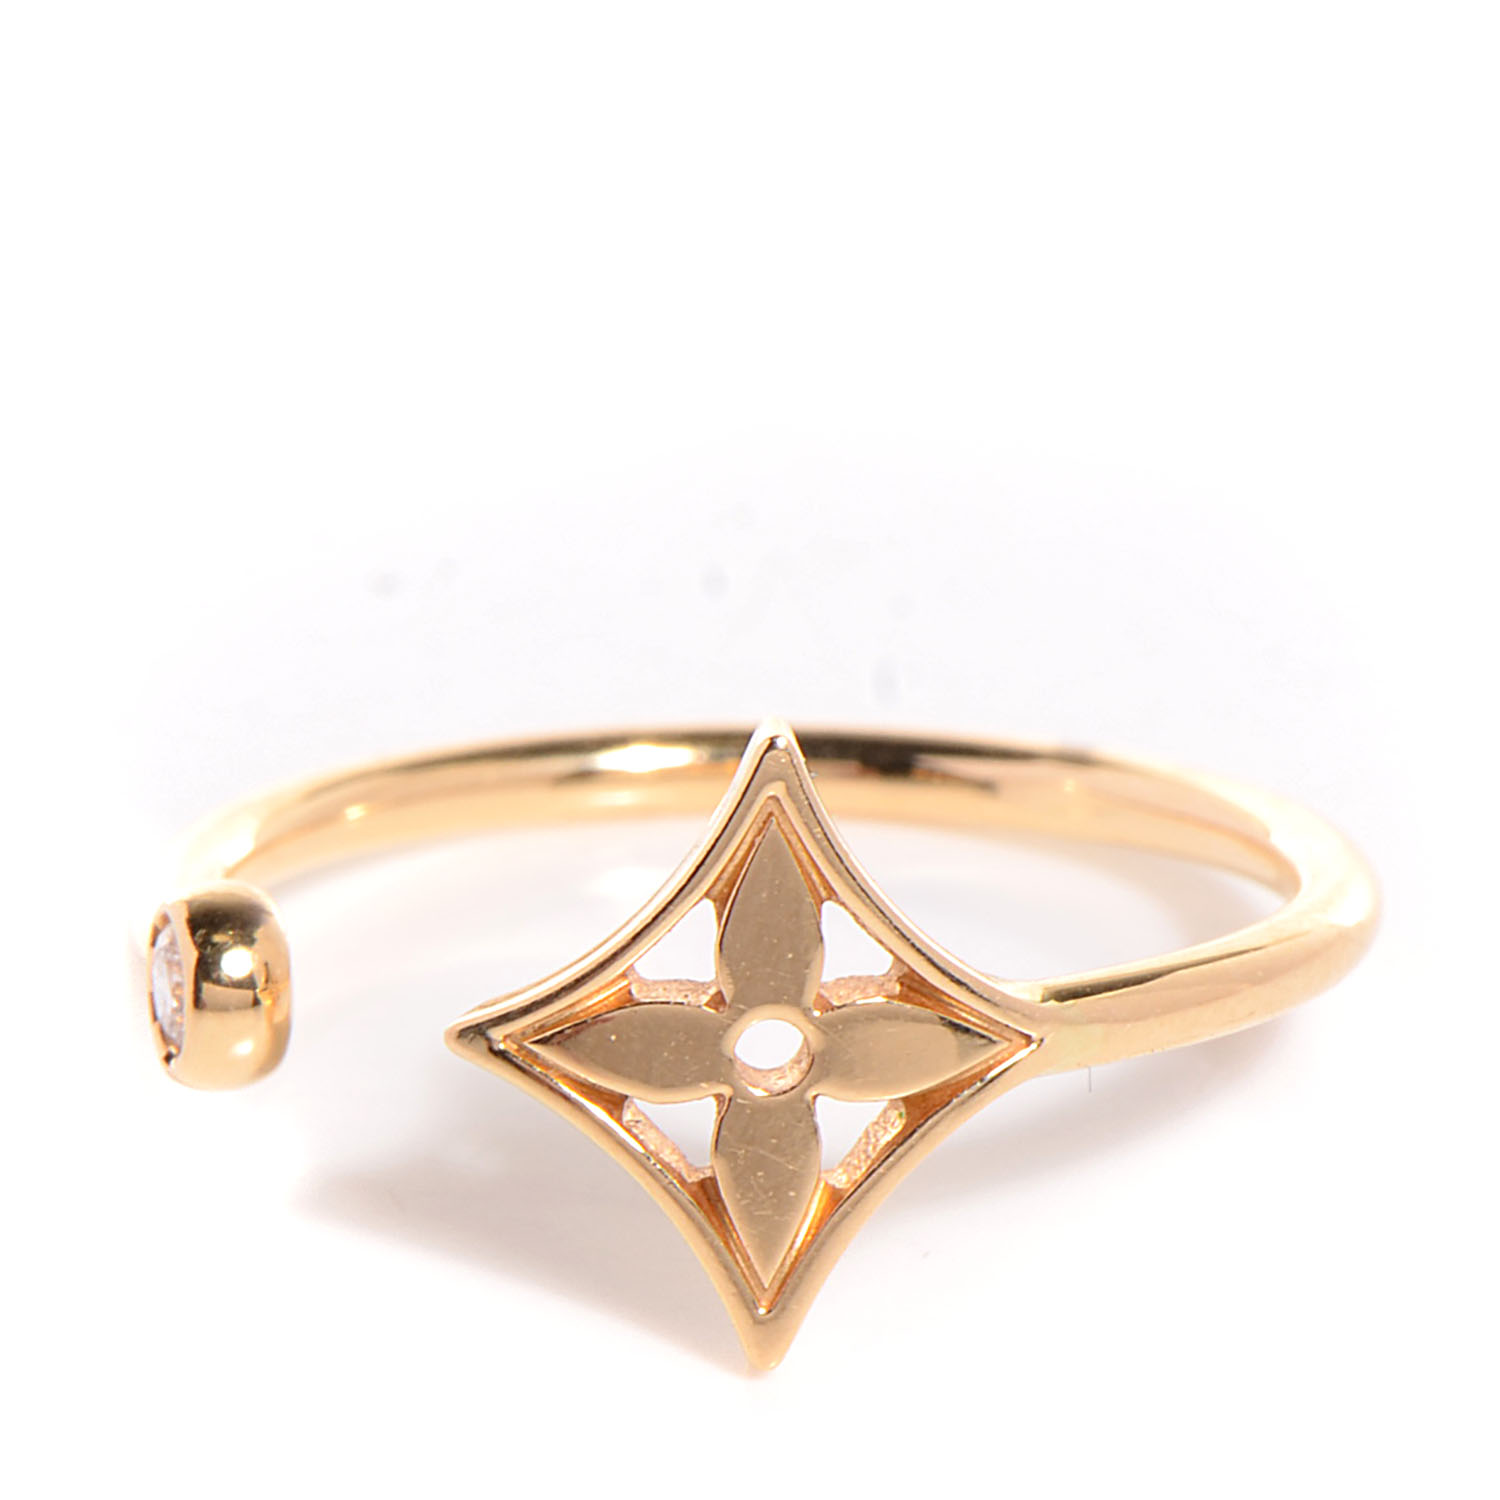 Louis Vuitton Idylle Blossom Ring, 3 Golds and Diamonds Gold. Size 51